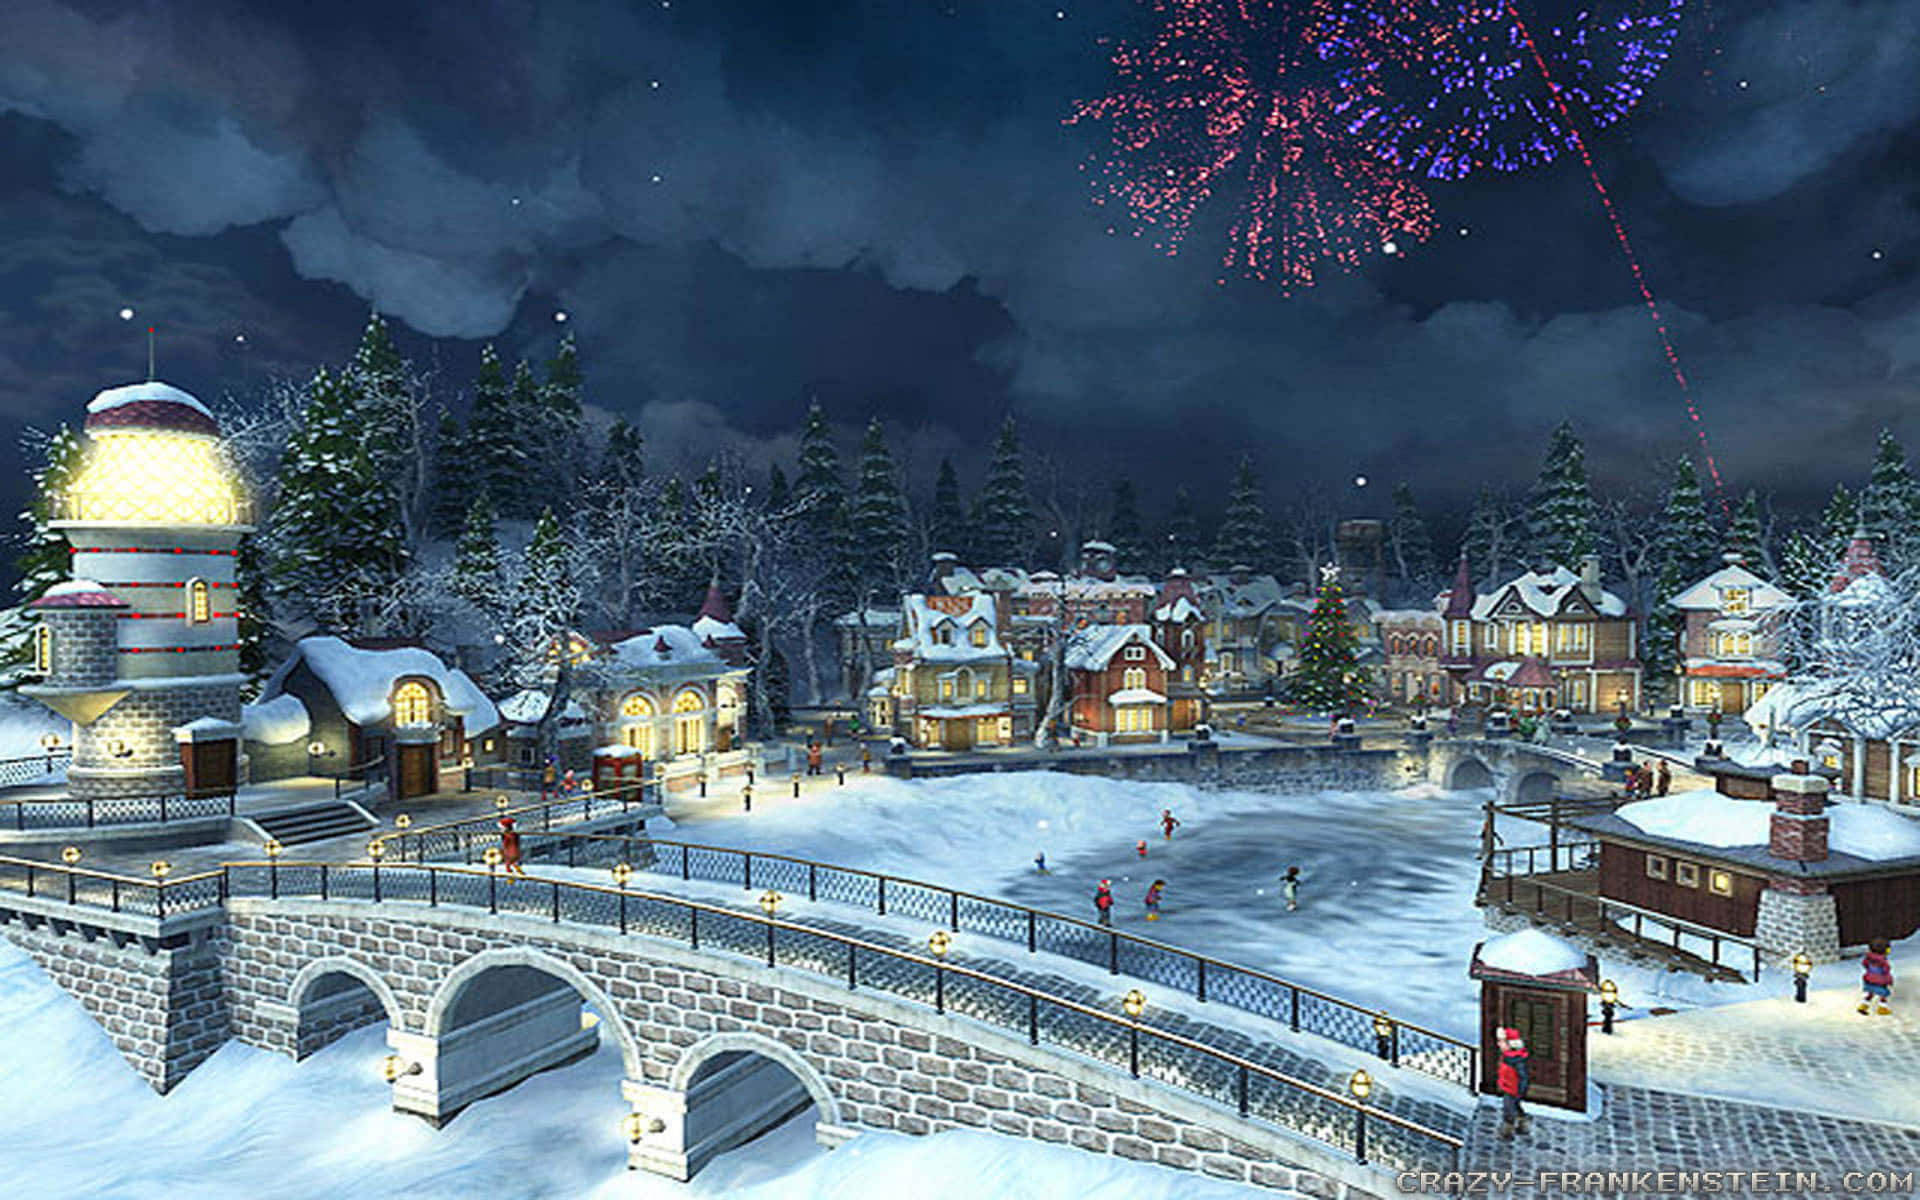 Join in the festive fun at a traditional Christmas Village this holiday season. Wallpaper